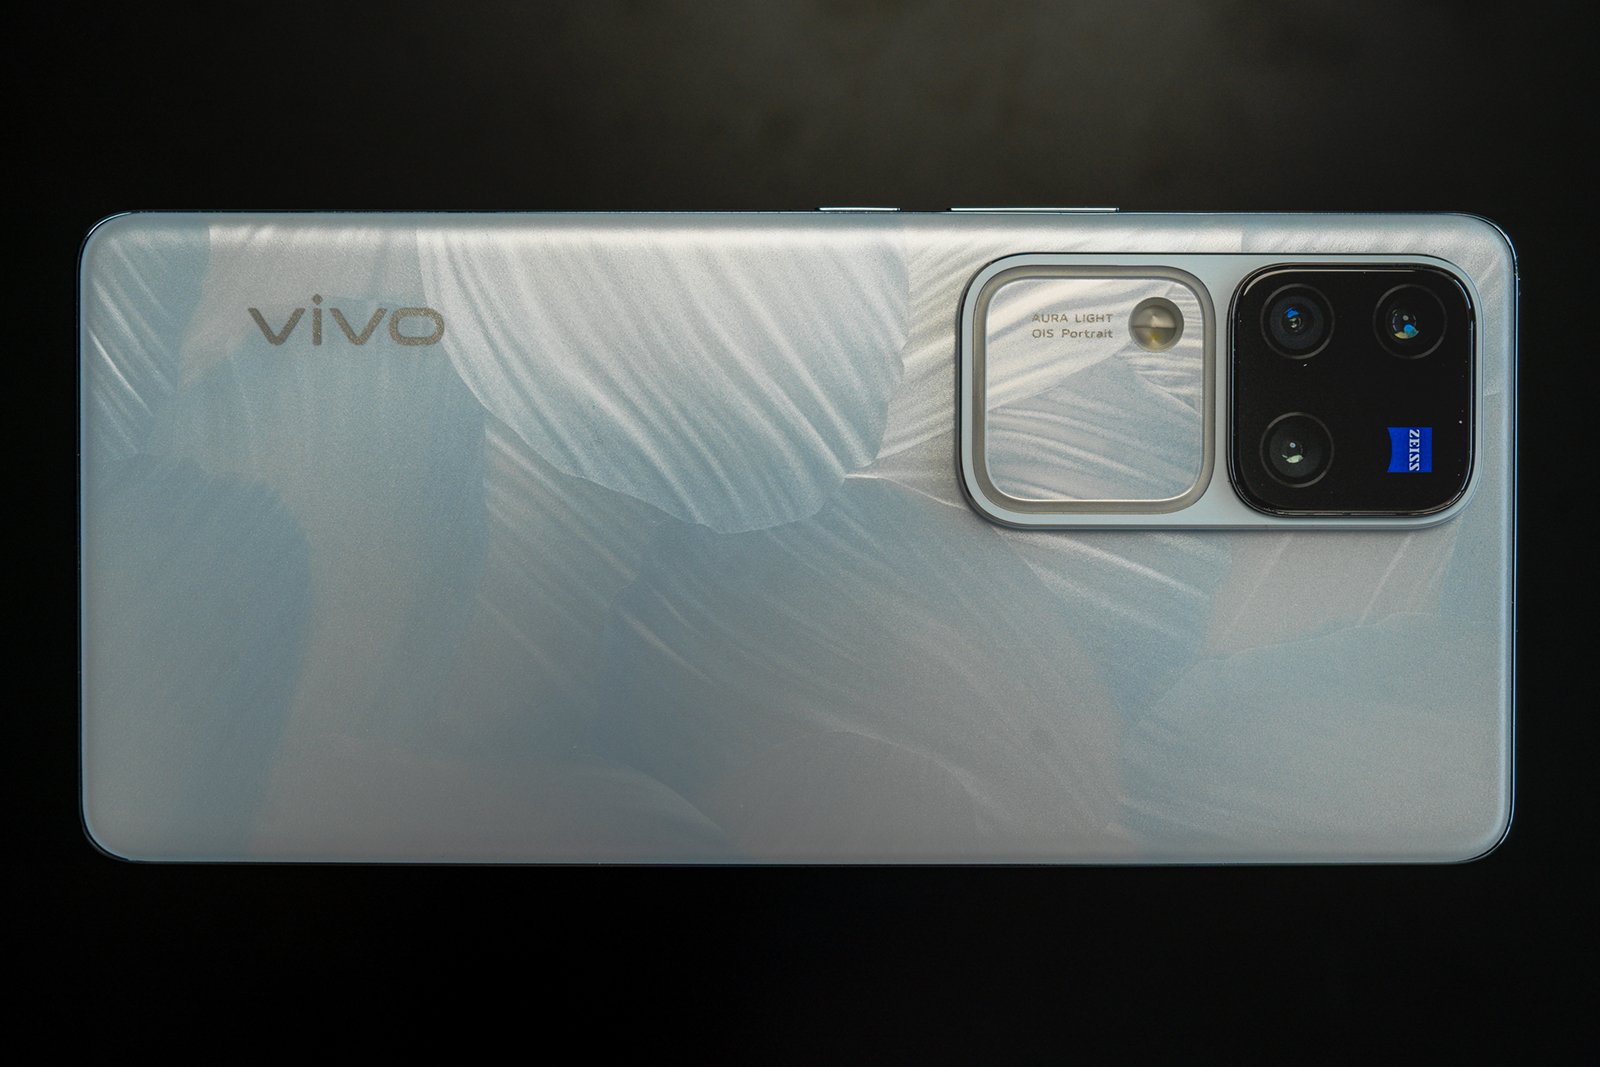 A vivo smartphone with a reflective silver finish lies on a dark surface. it features a large, square camera module with multiple lenses and a blue zeiss logo.